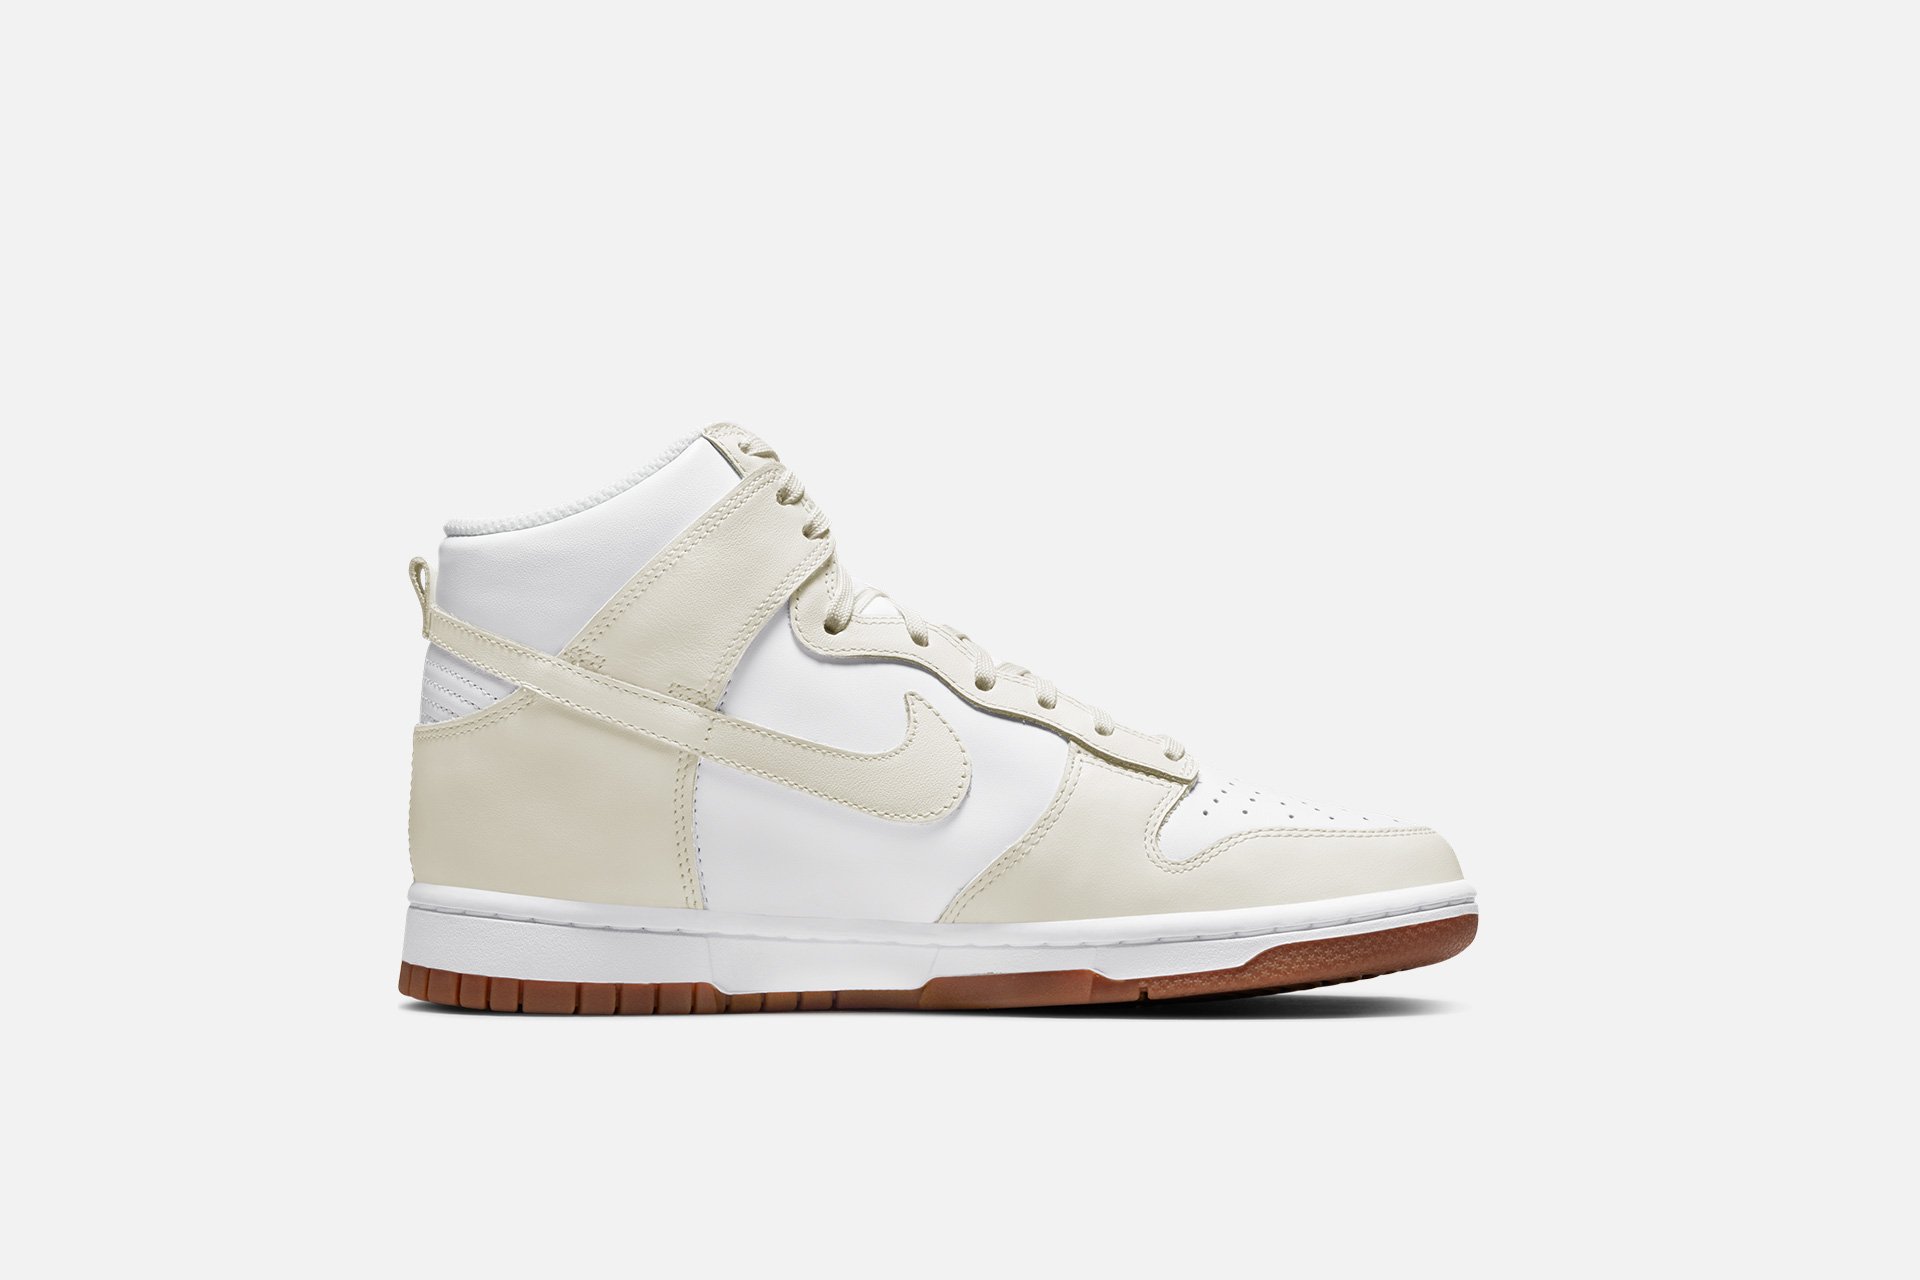 Nike W Dunk High, White/ Sail-Gum Med Brown - Footshop - Releases